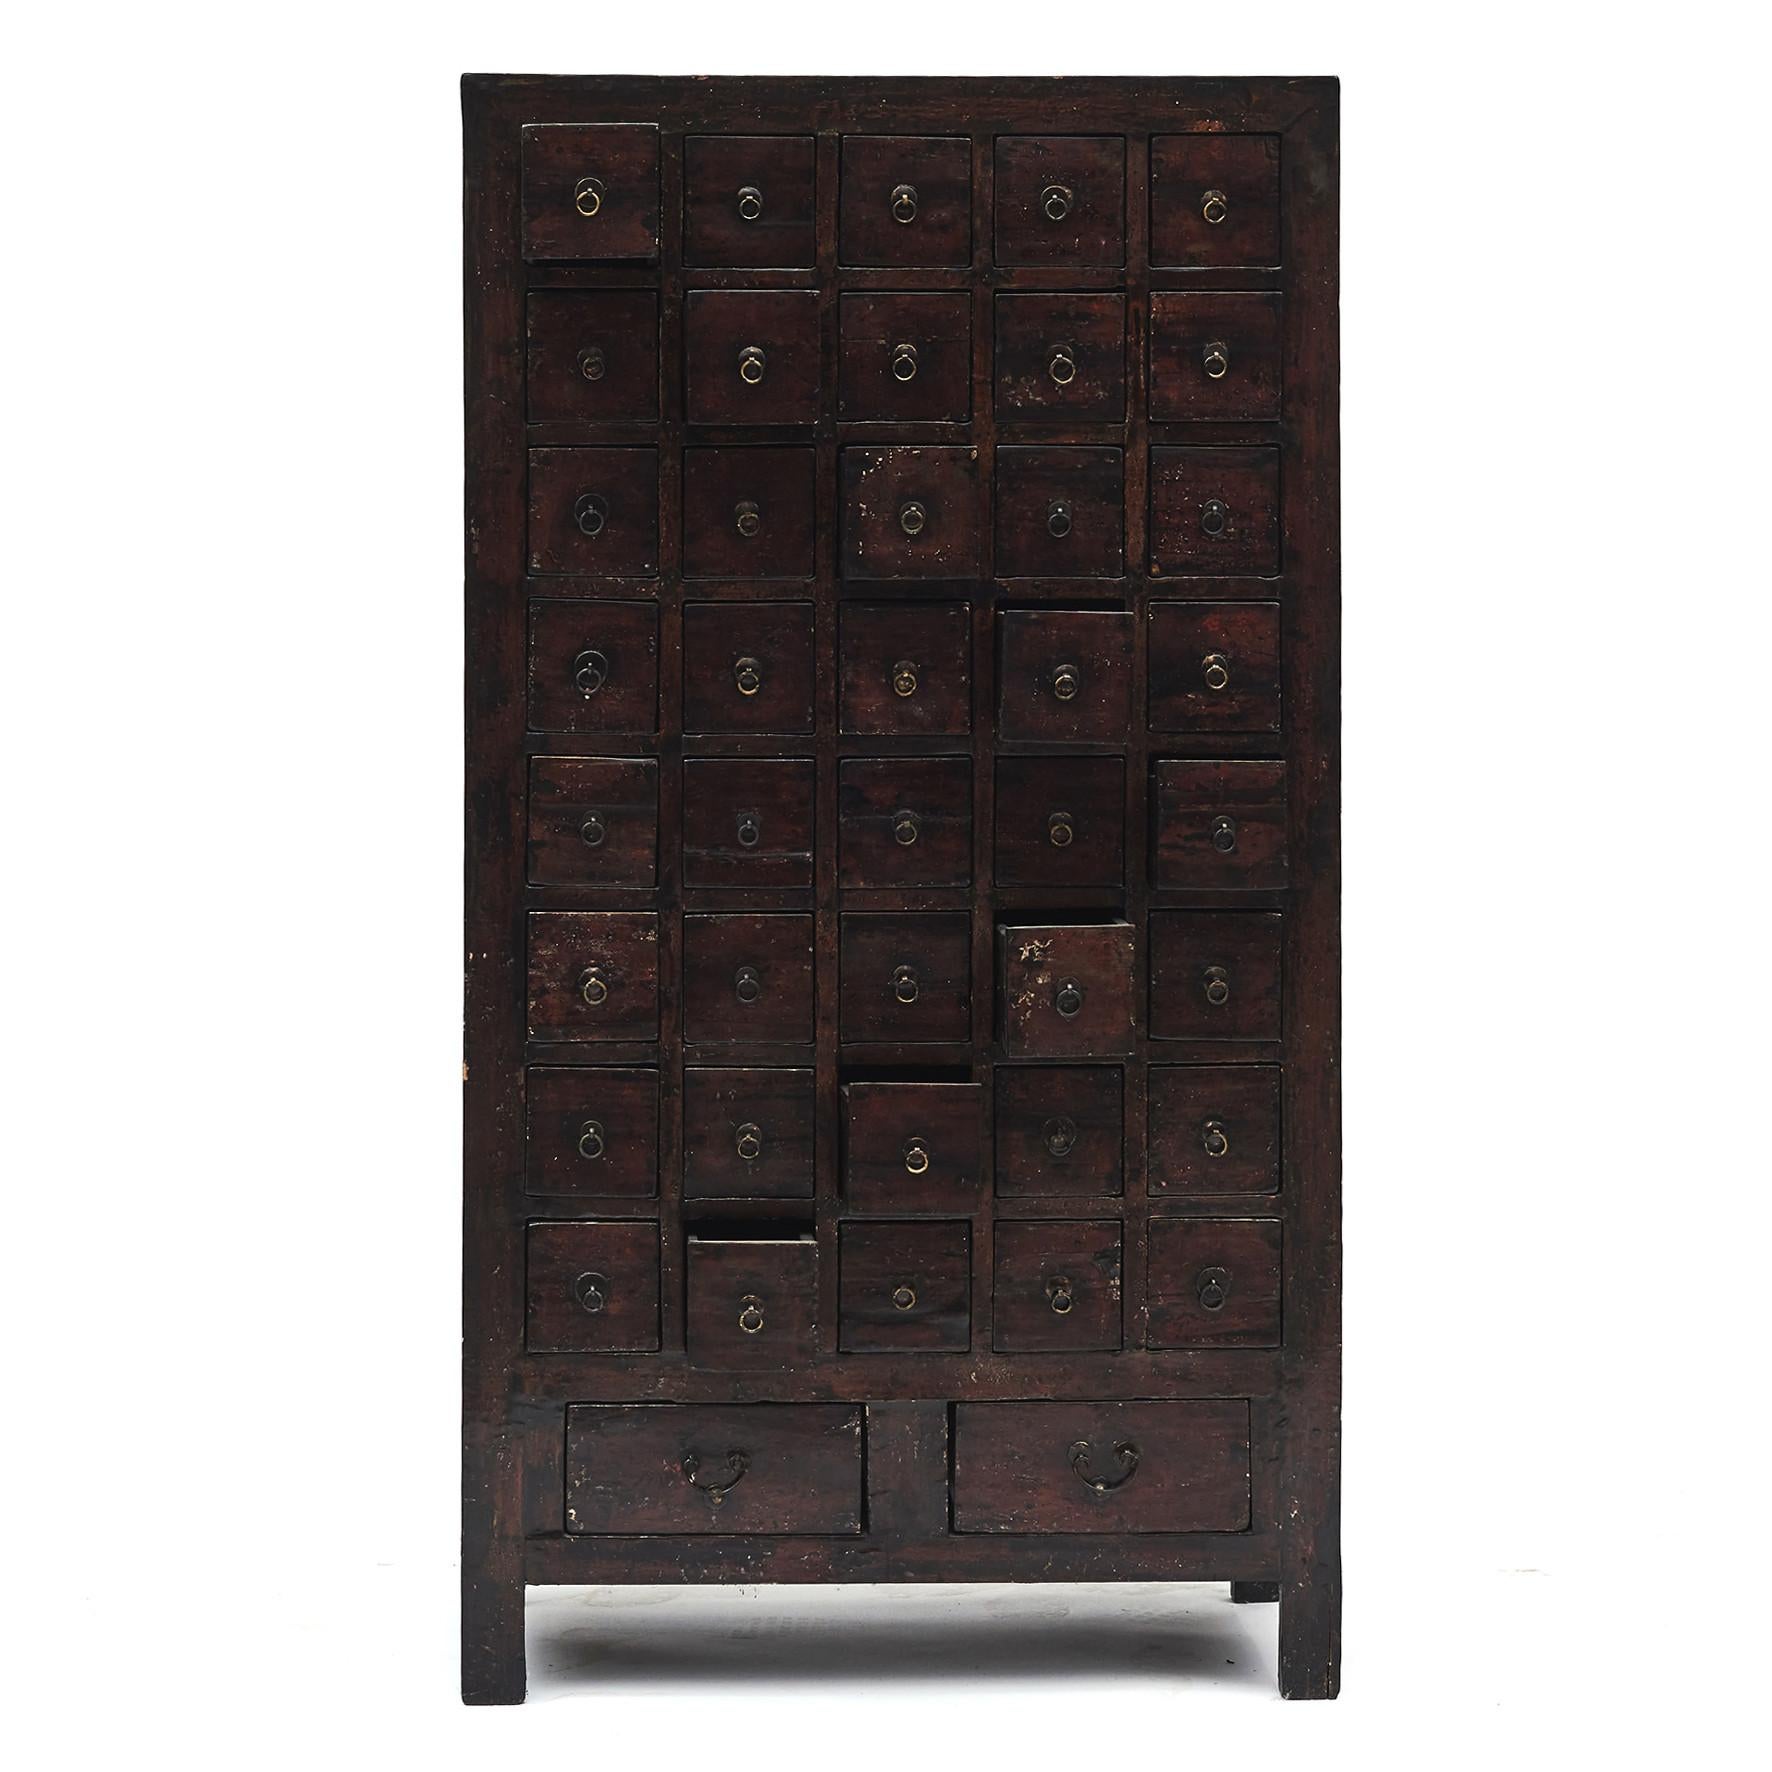 Chinese apothecary / pharmacy medicine chest with 42 drawers.
Original dark reddish brown lacquer with a beautiful natural age-related patina.
From Shanxi Province, mid-19th century.
Linden wood.